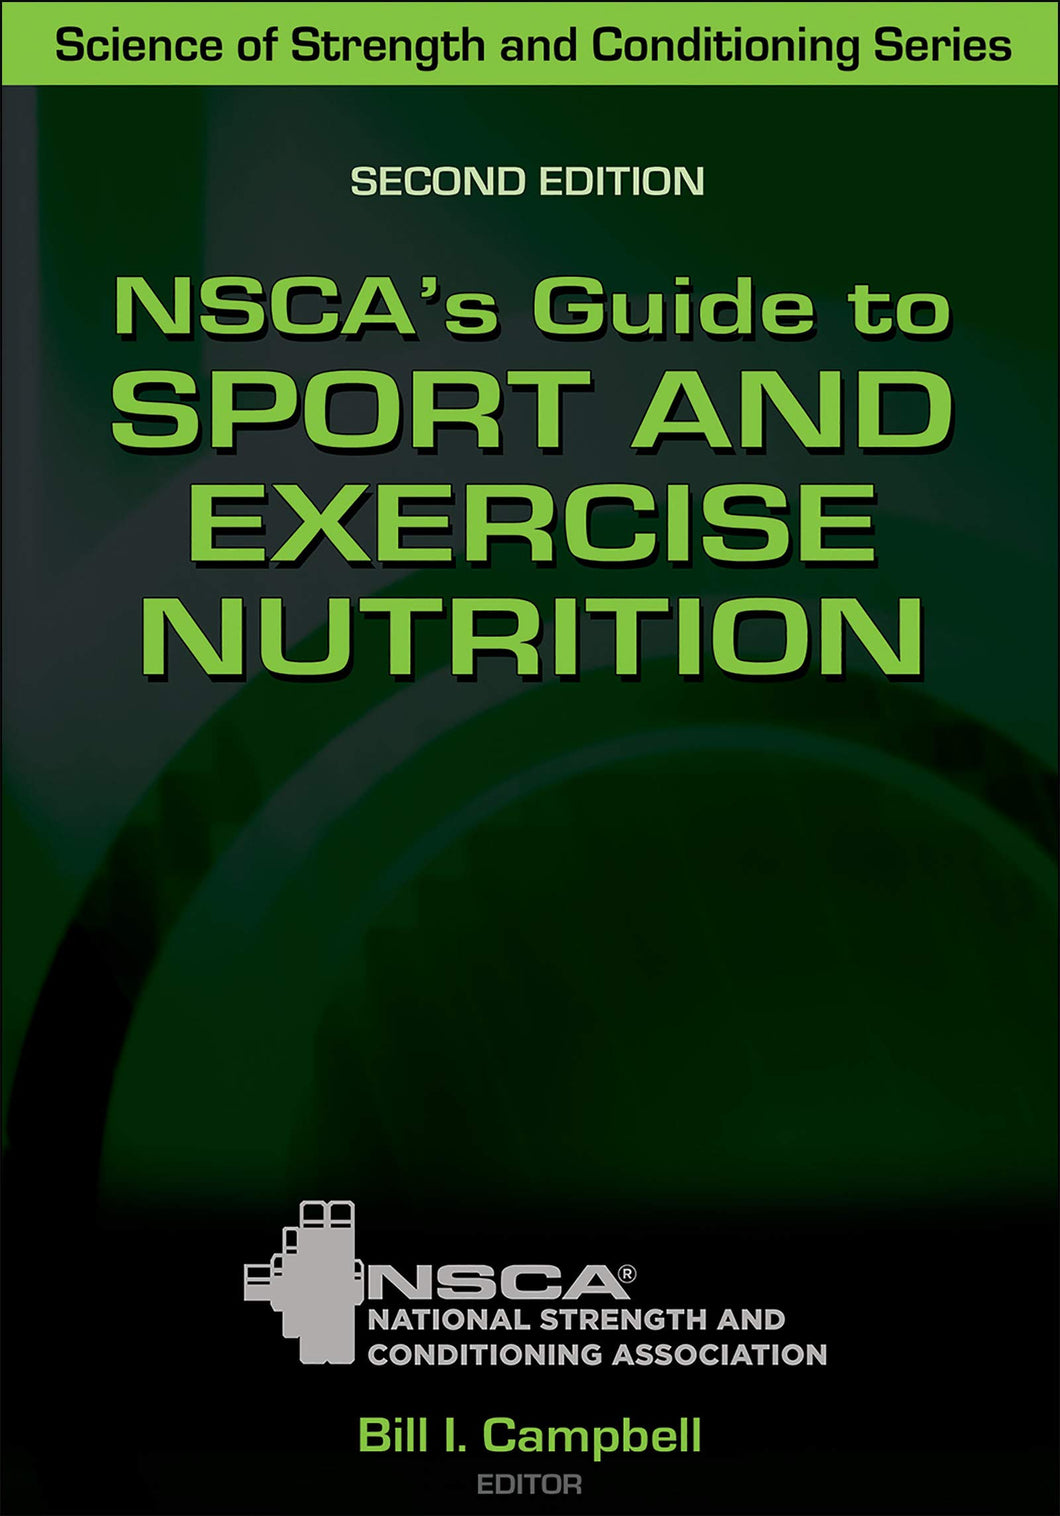 NSCA's Guide to Sport and Exercise Nutrition-2nd Edition